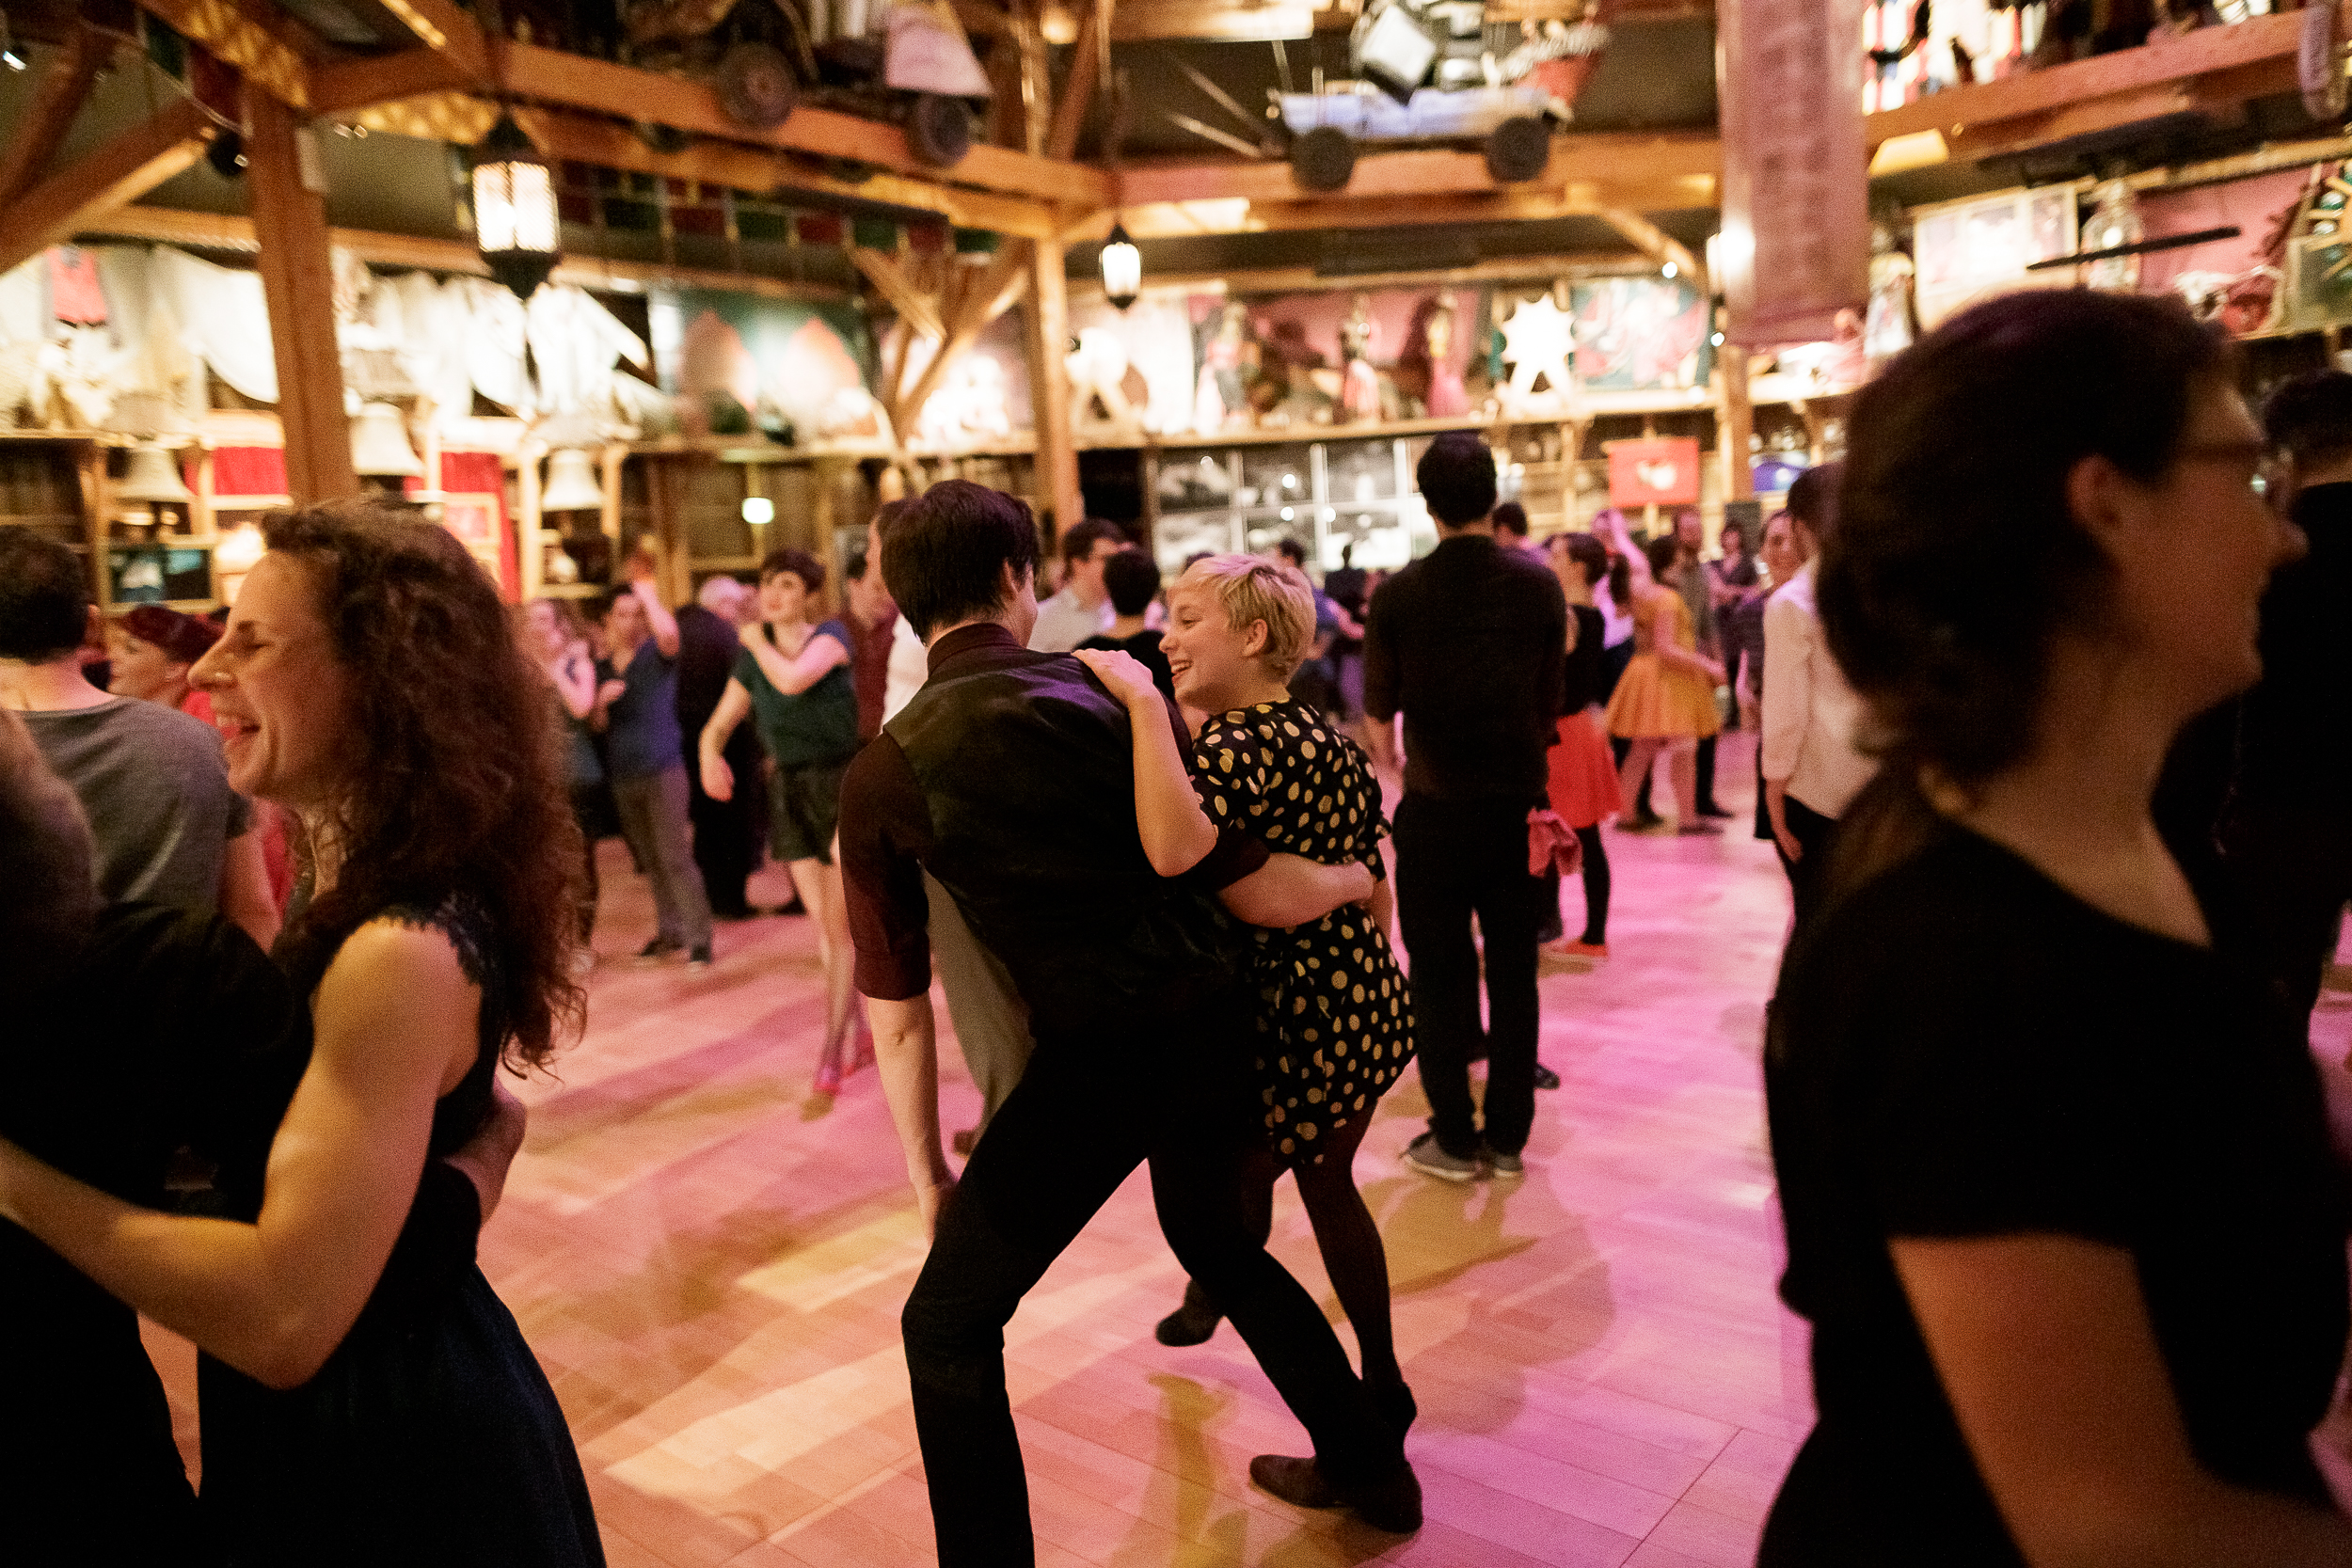  Nuit Swing à Zingaro - Photo Credit: For Dancers Only - http://www.ebobrie.com/nuit-swing-19032016 